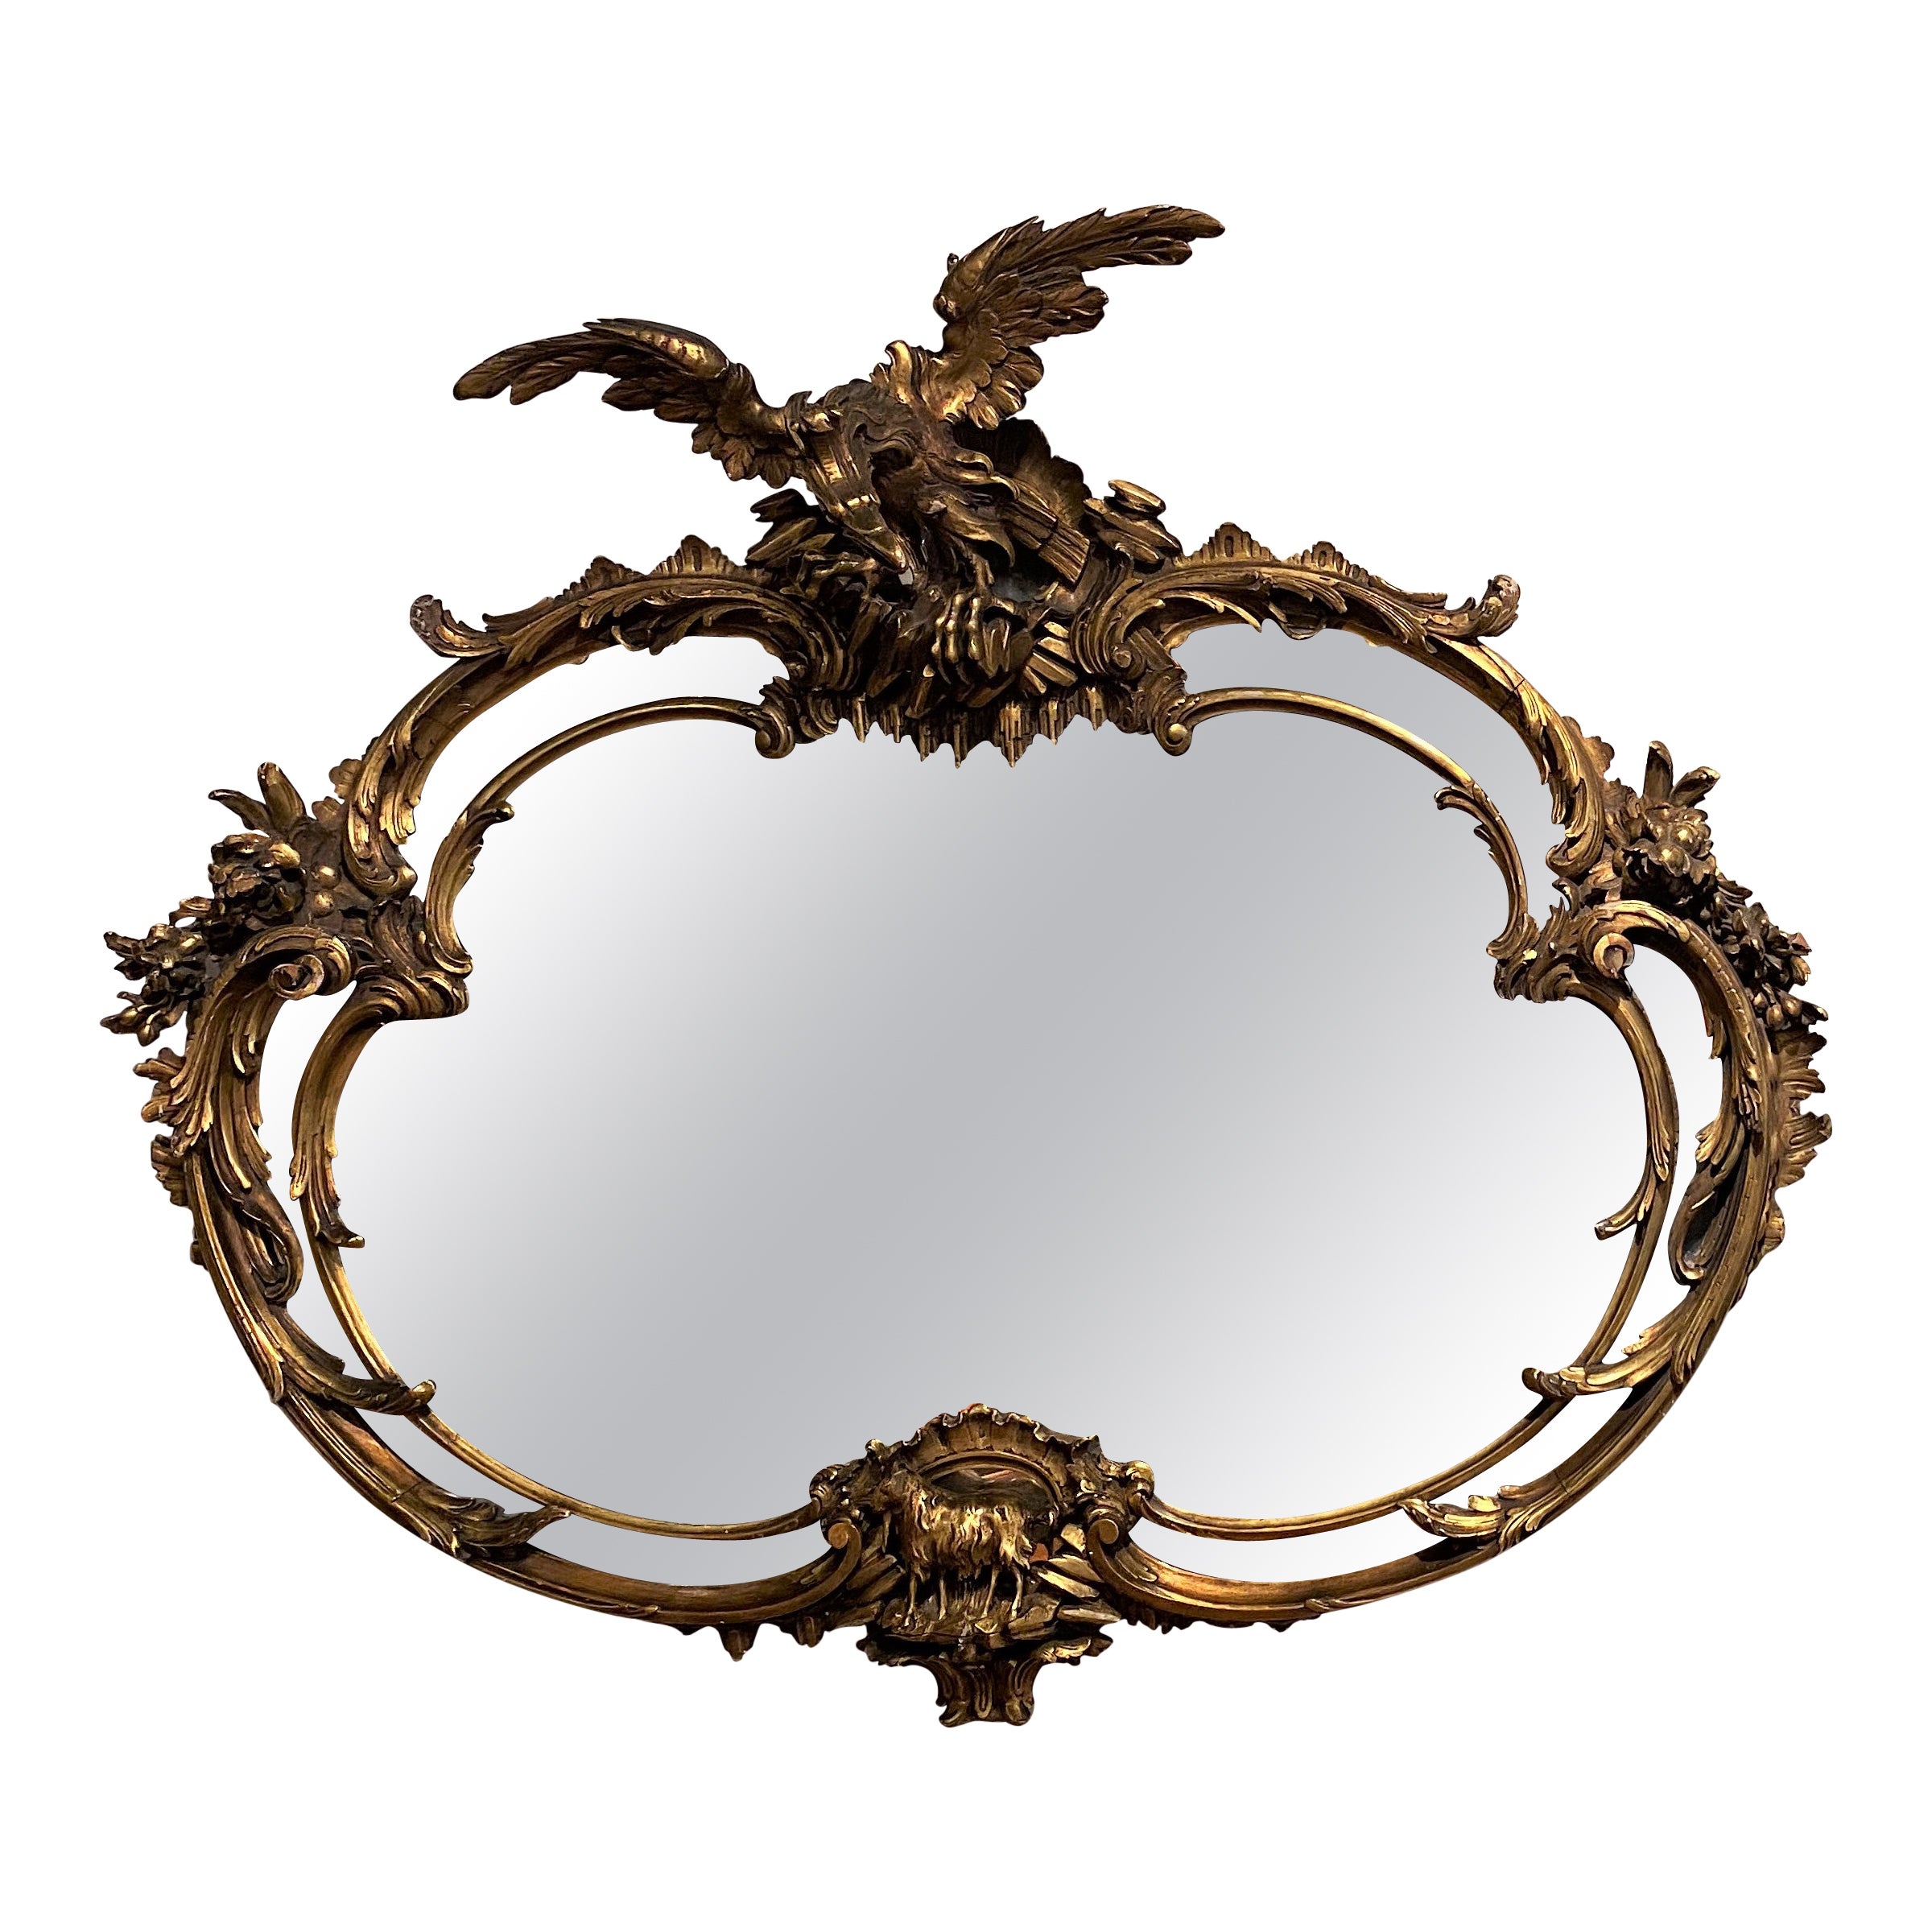 George III Style Heavily Carved Rococo Oval Giltwood Mirror with Eagle Crest For Sale